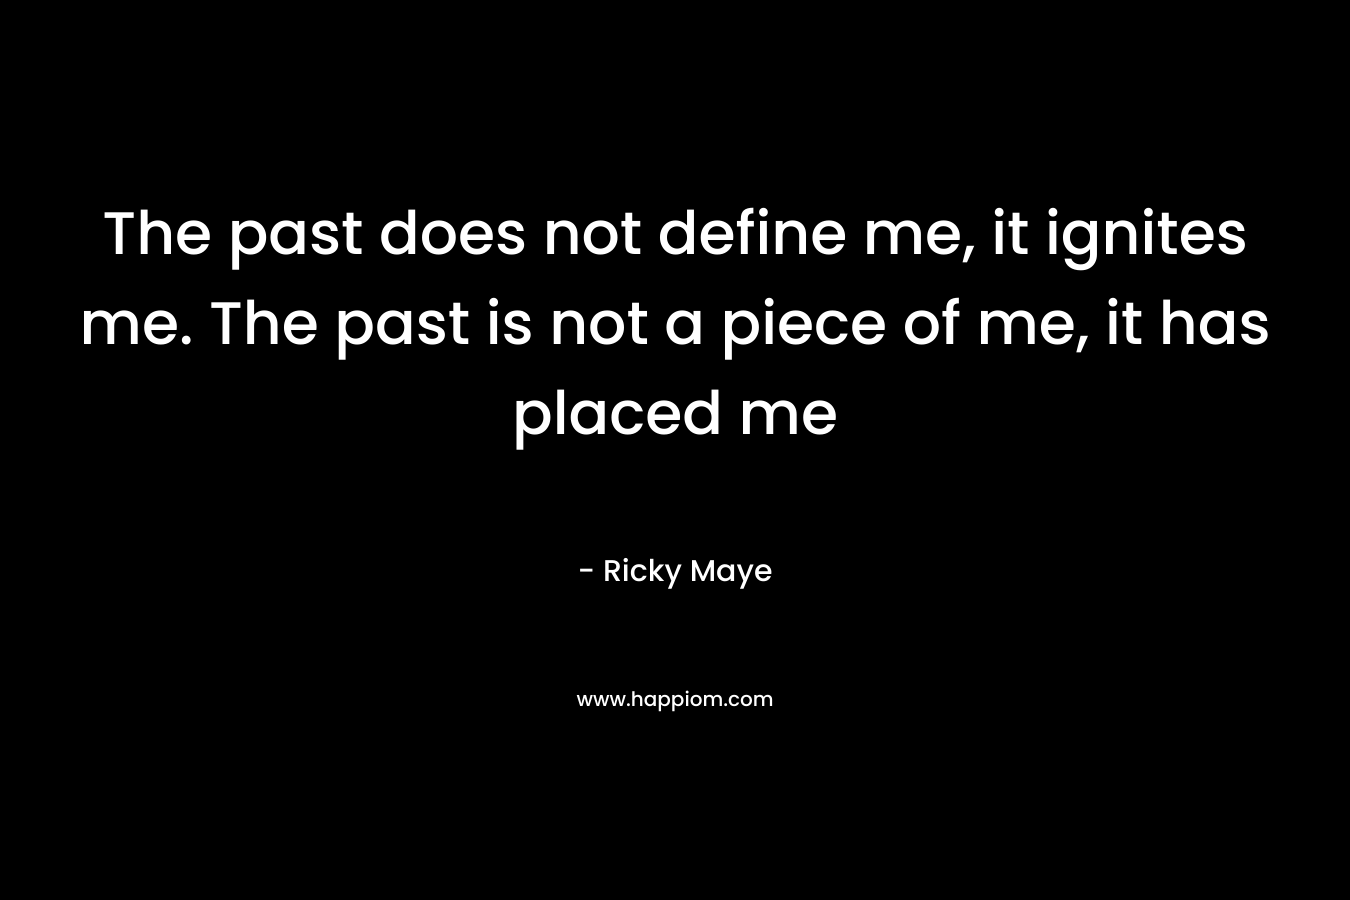 The past does not define me, it ignites me. The past is not a piece of me, it has placed me